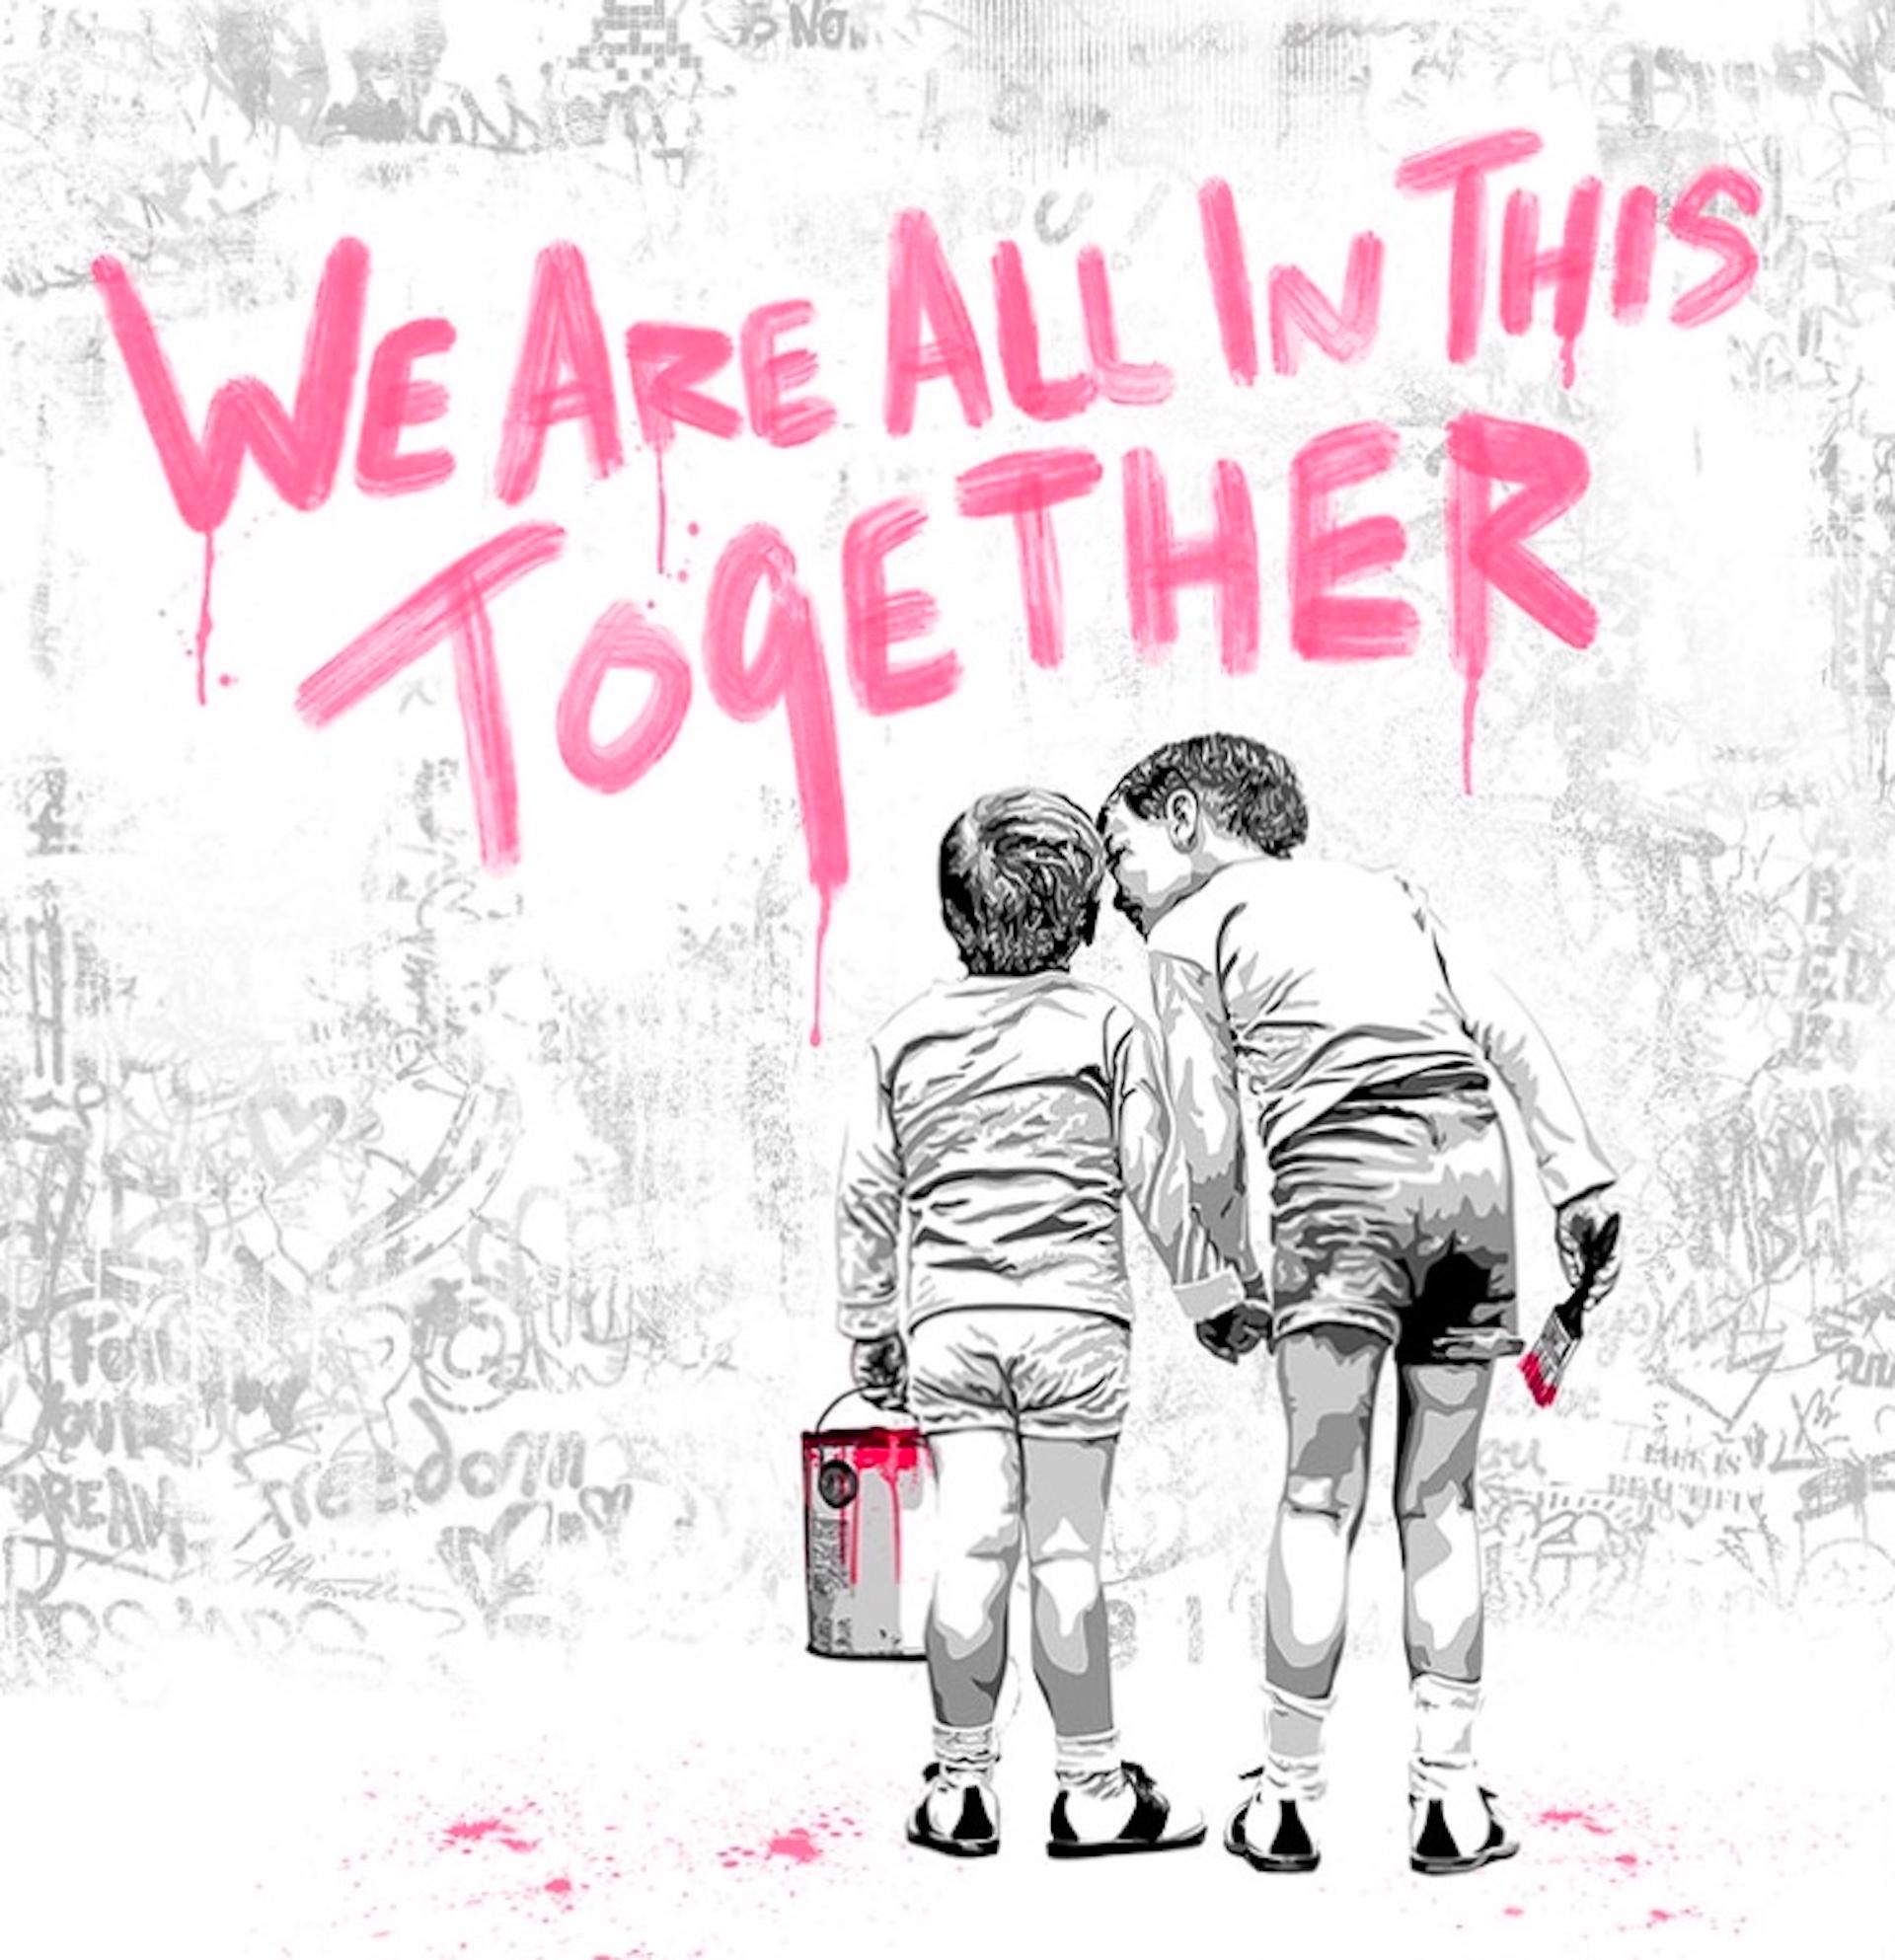 We are all in this together (Fuchsia Edition) - Print by Mr. Brainwash